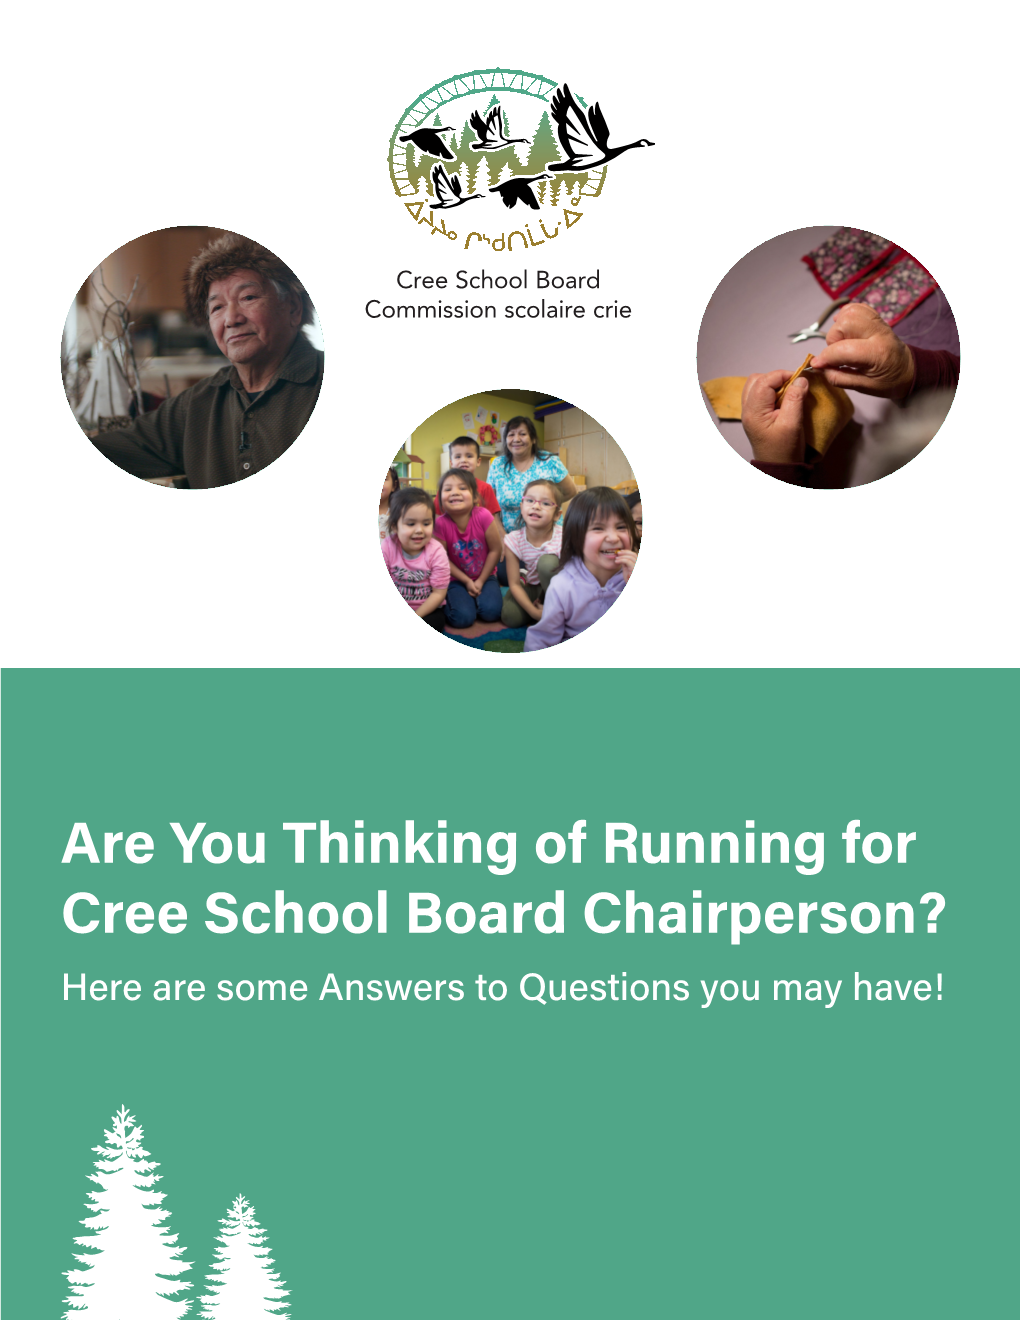 Are You Thinking of Running for Cree School Board Chairperson?